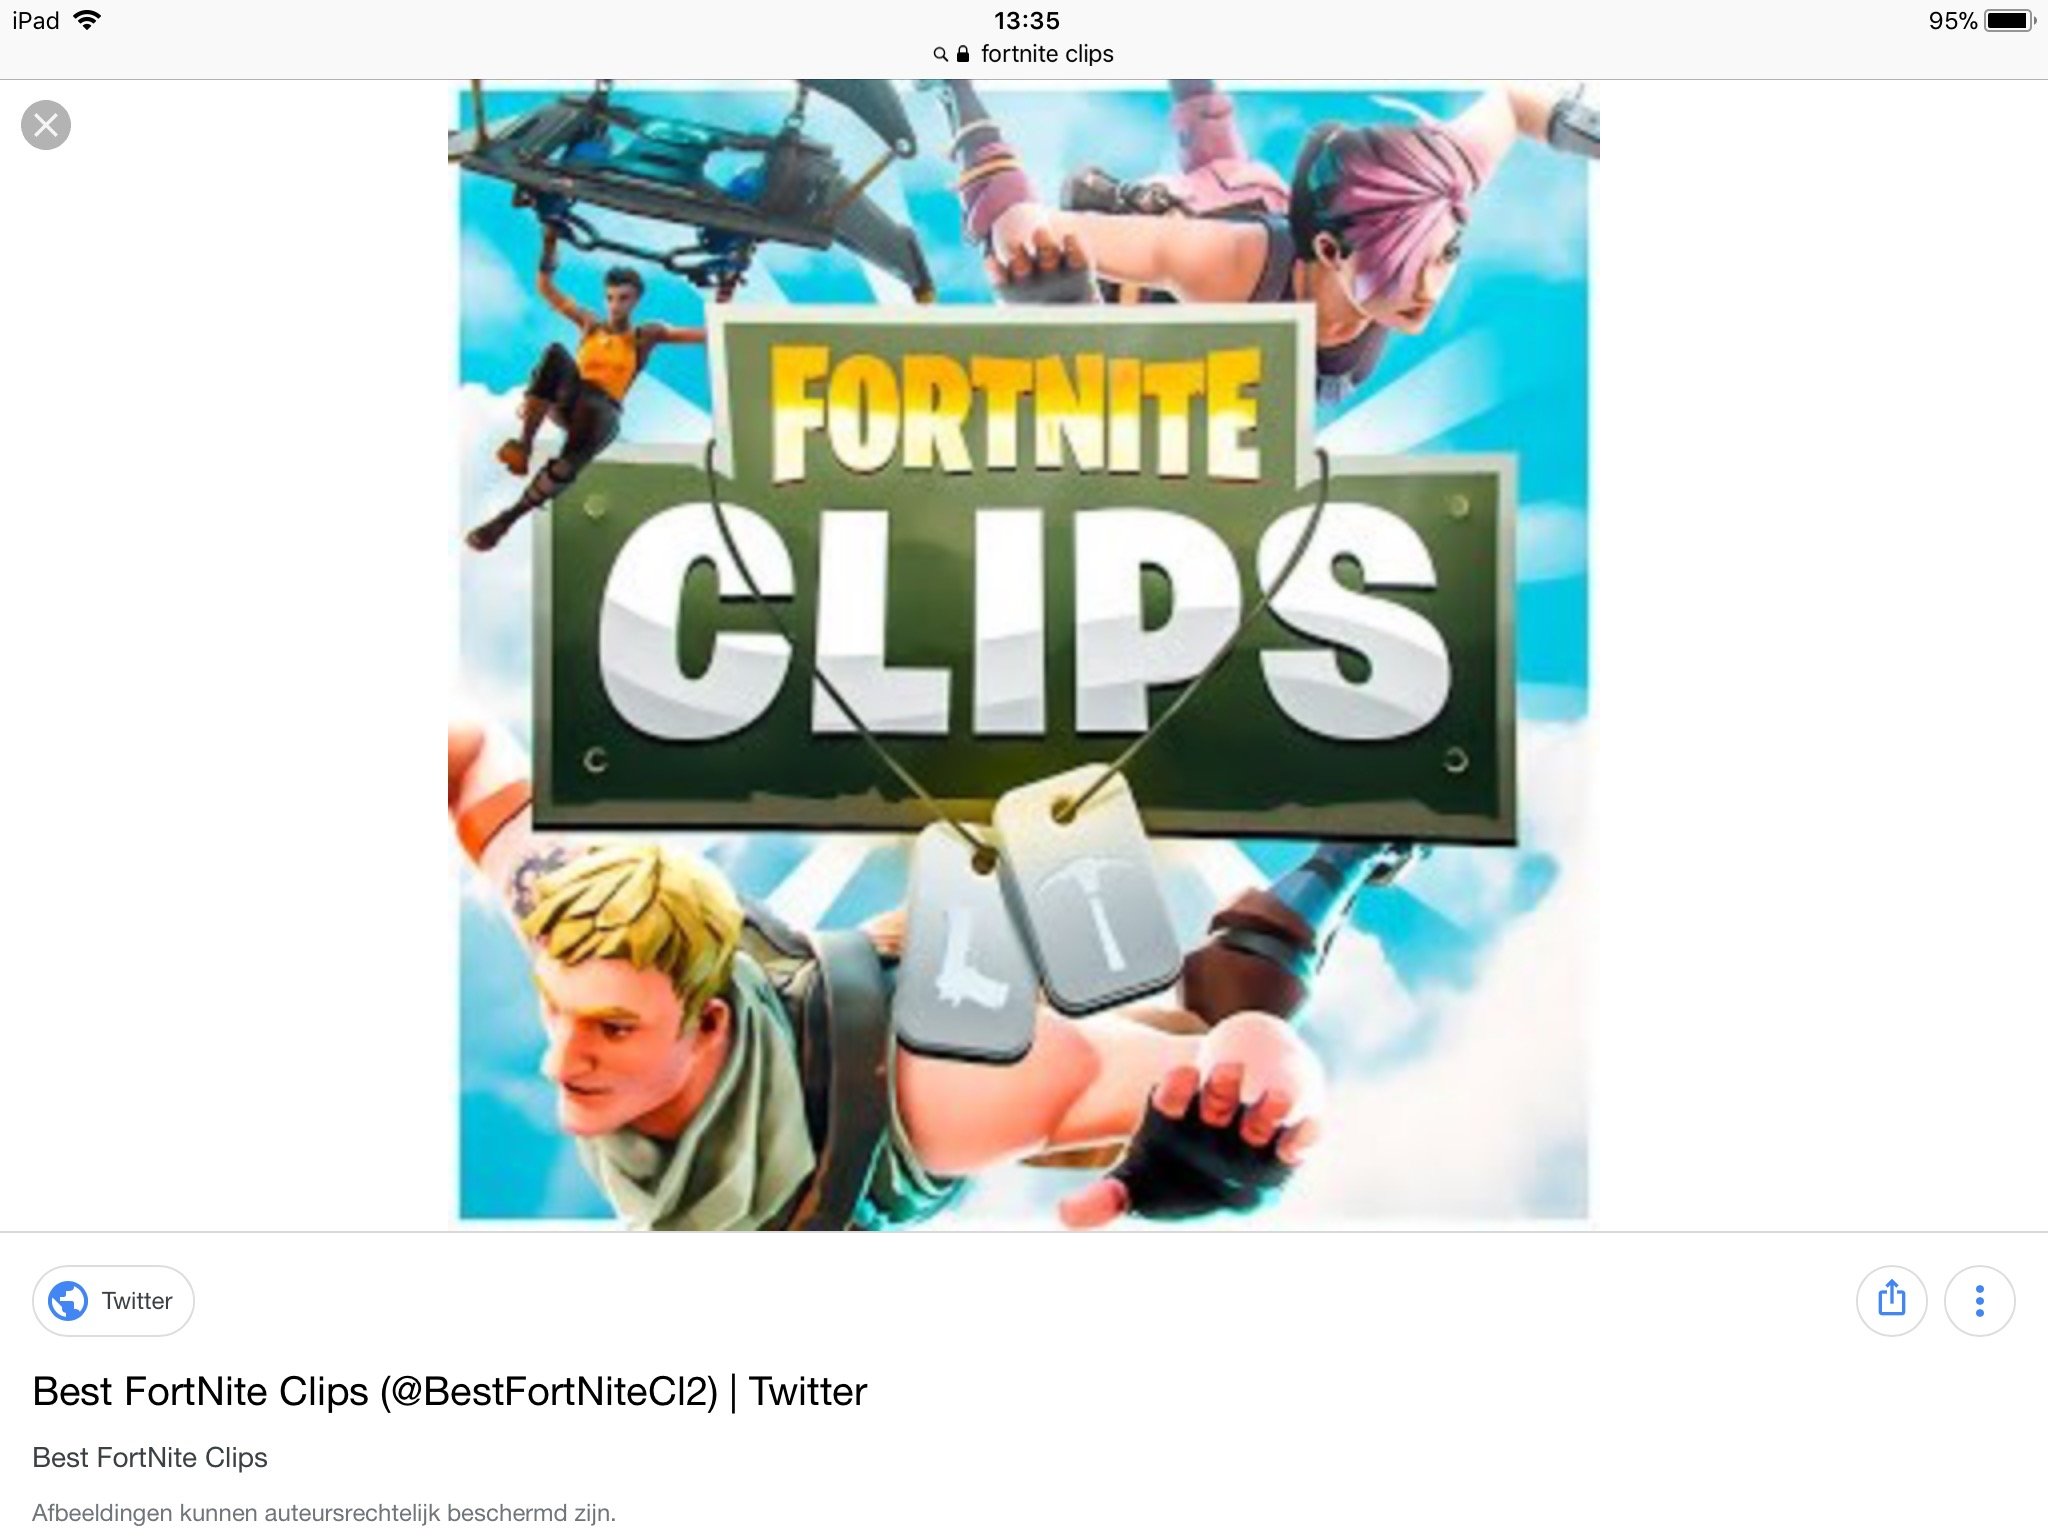 Send your Funny fortnite clips